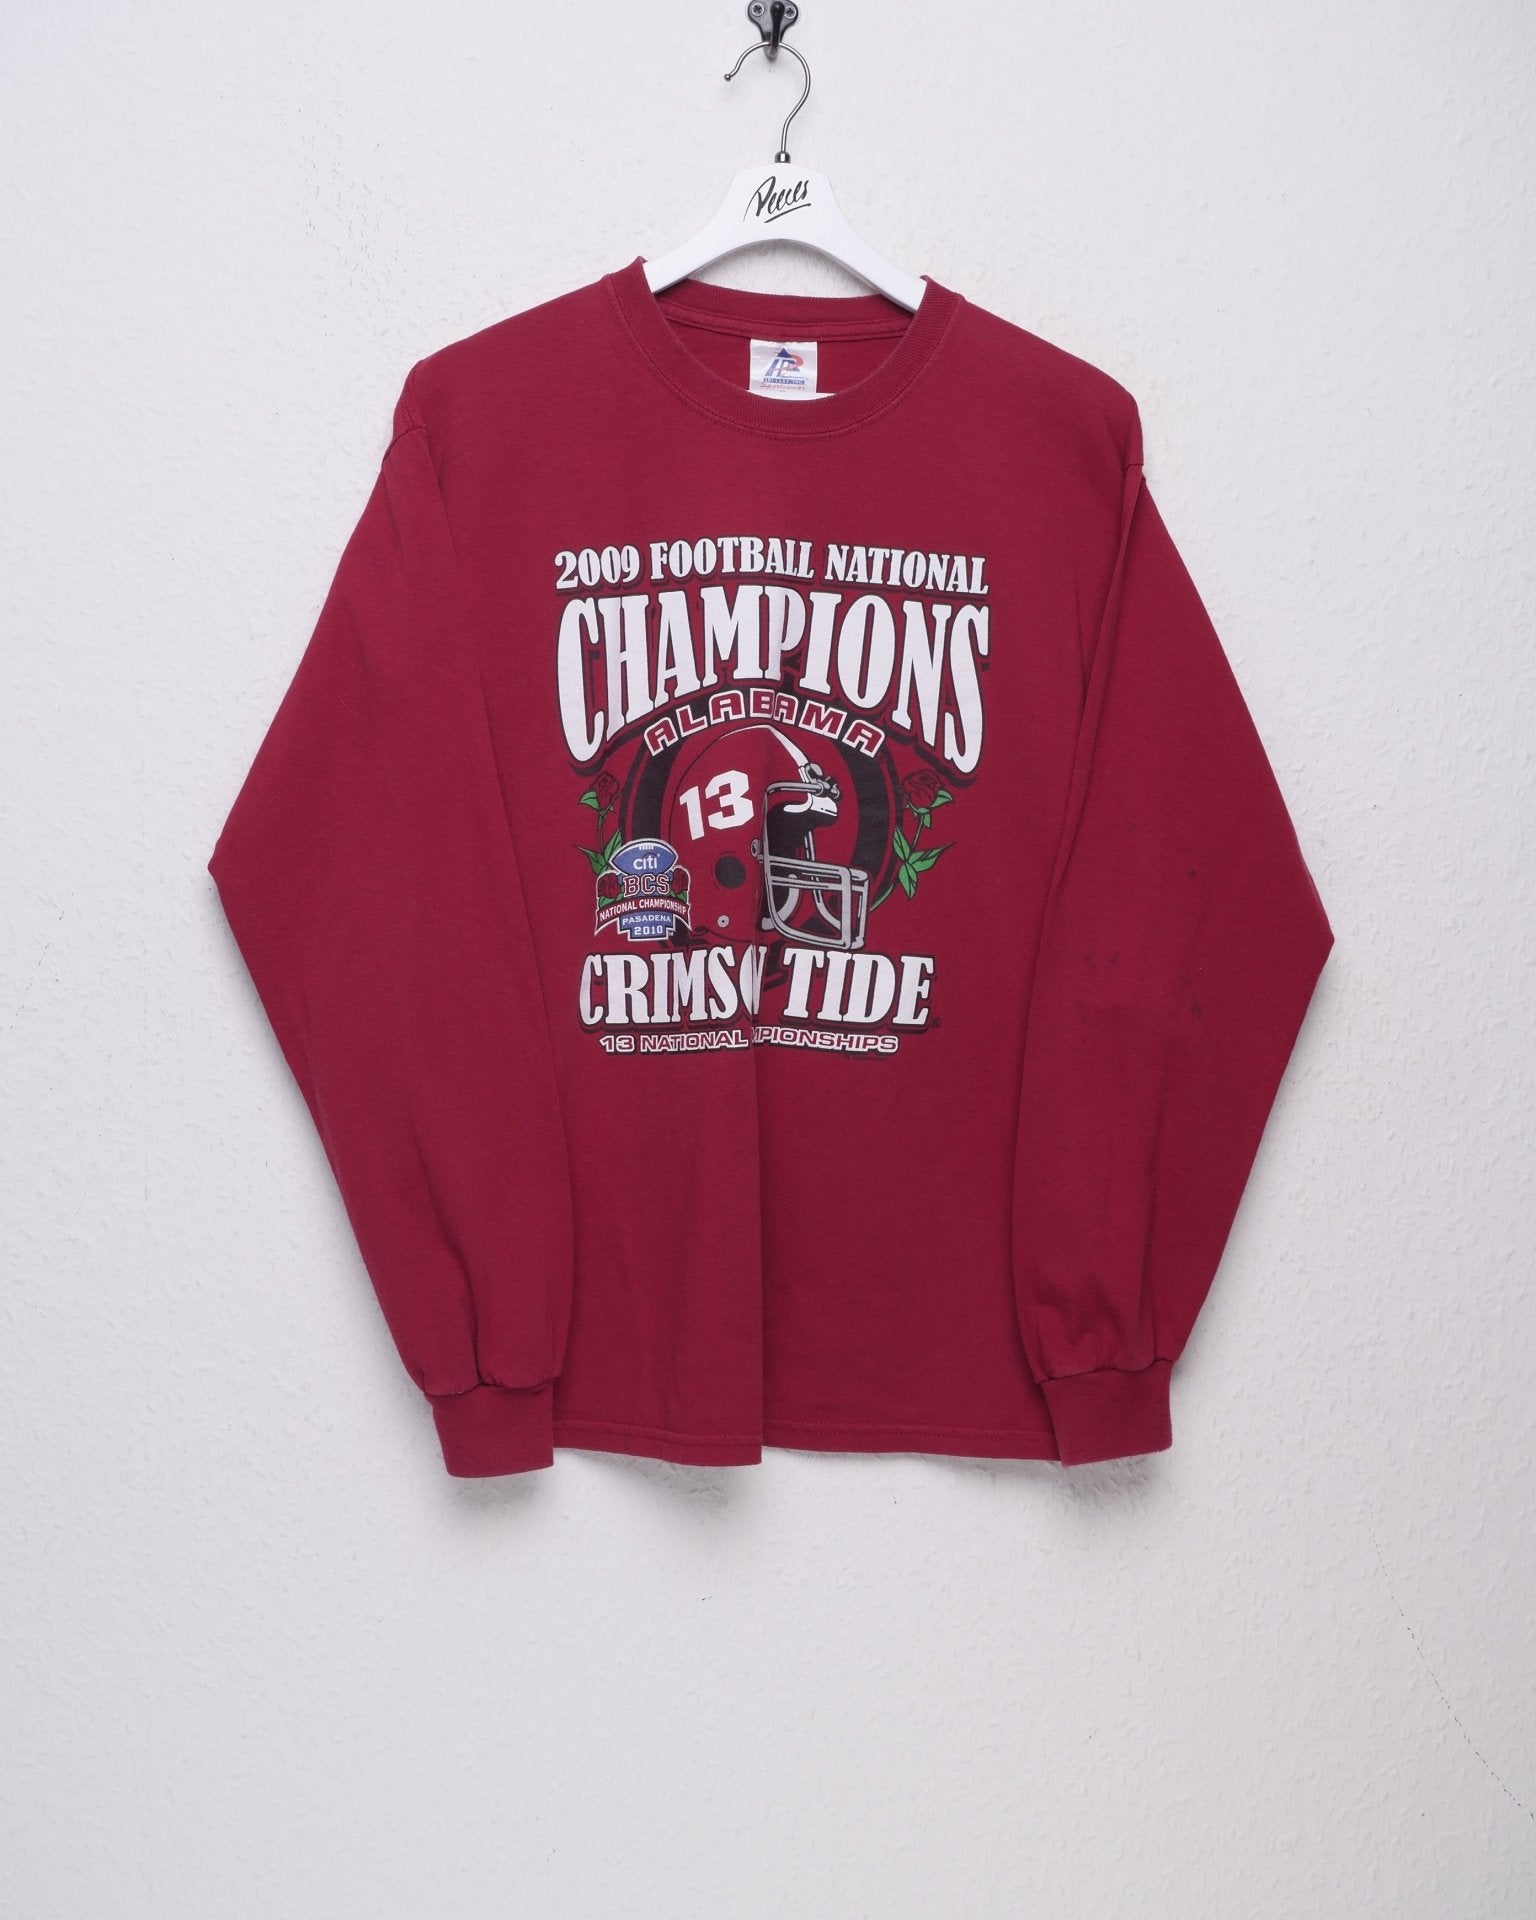 2009 Football National Champions printed Spellout L/S Shirt - Peeces